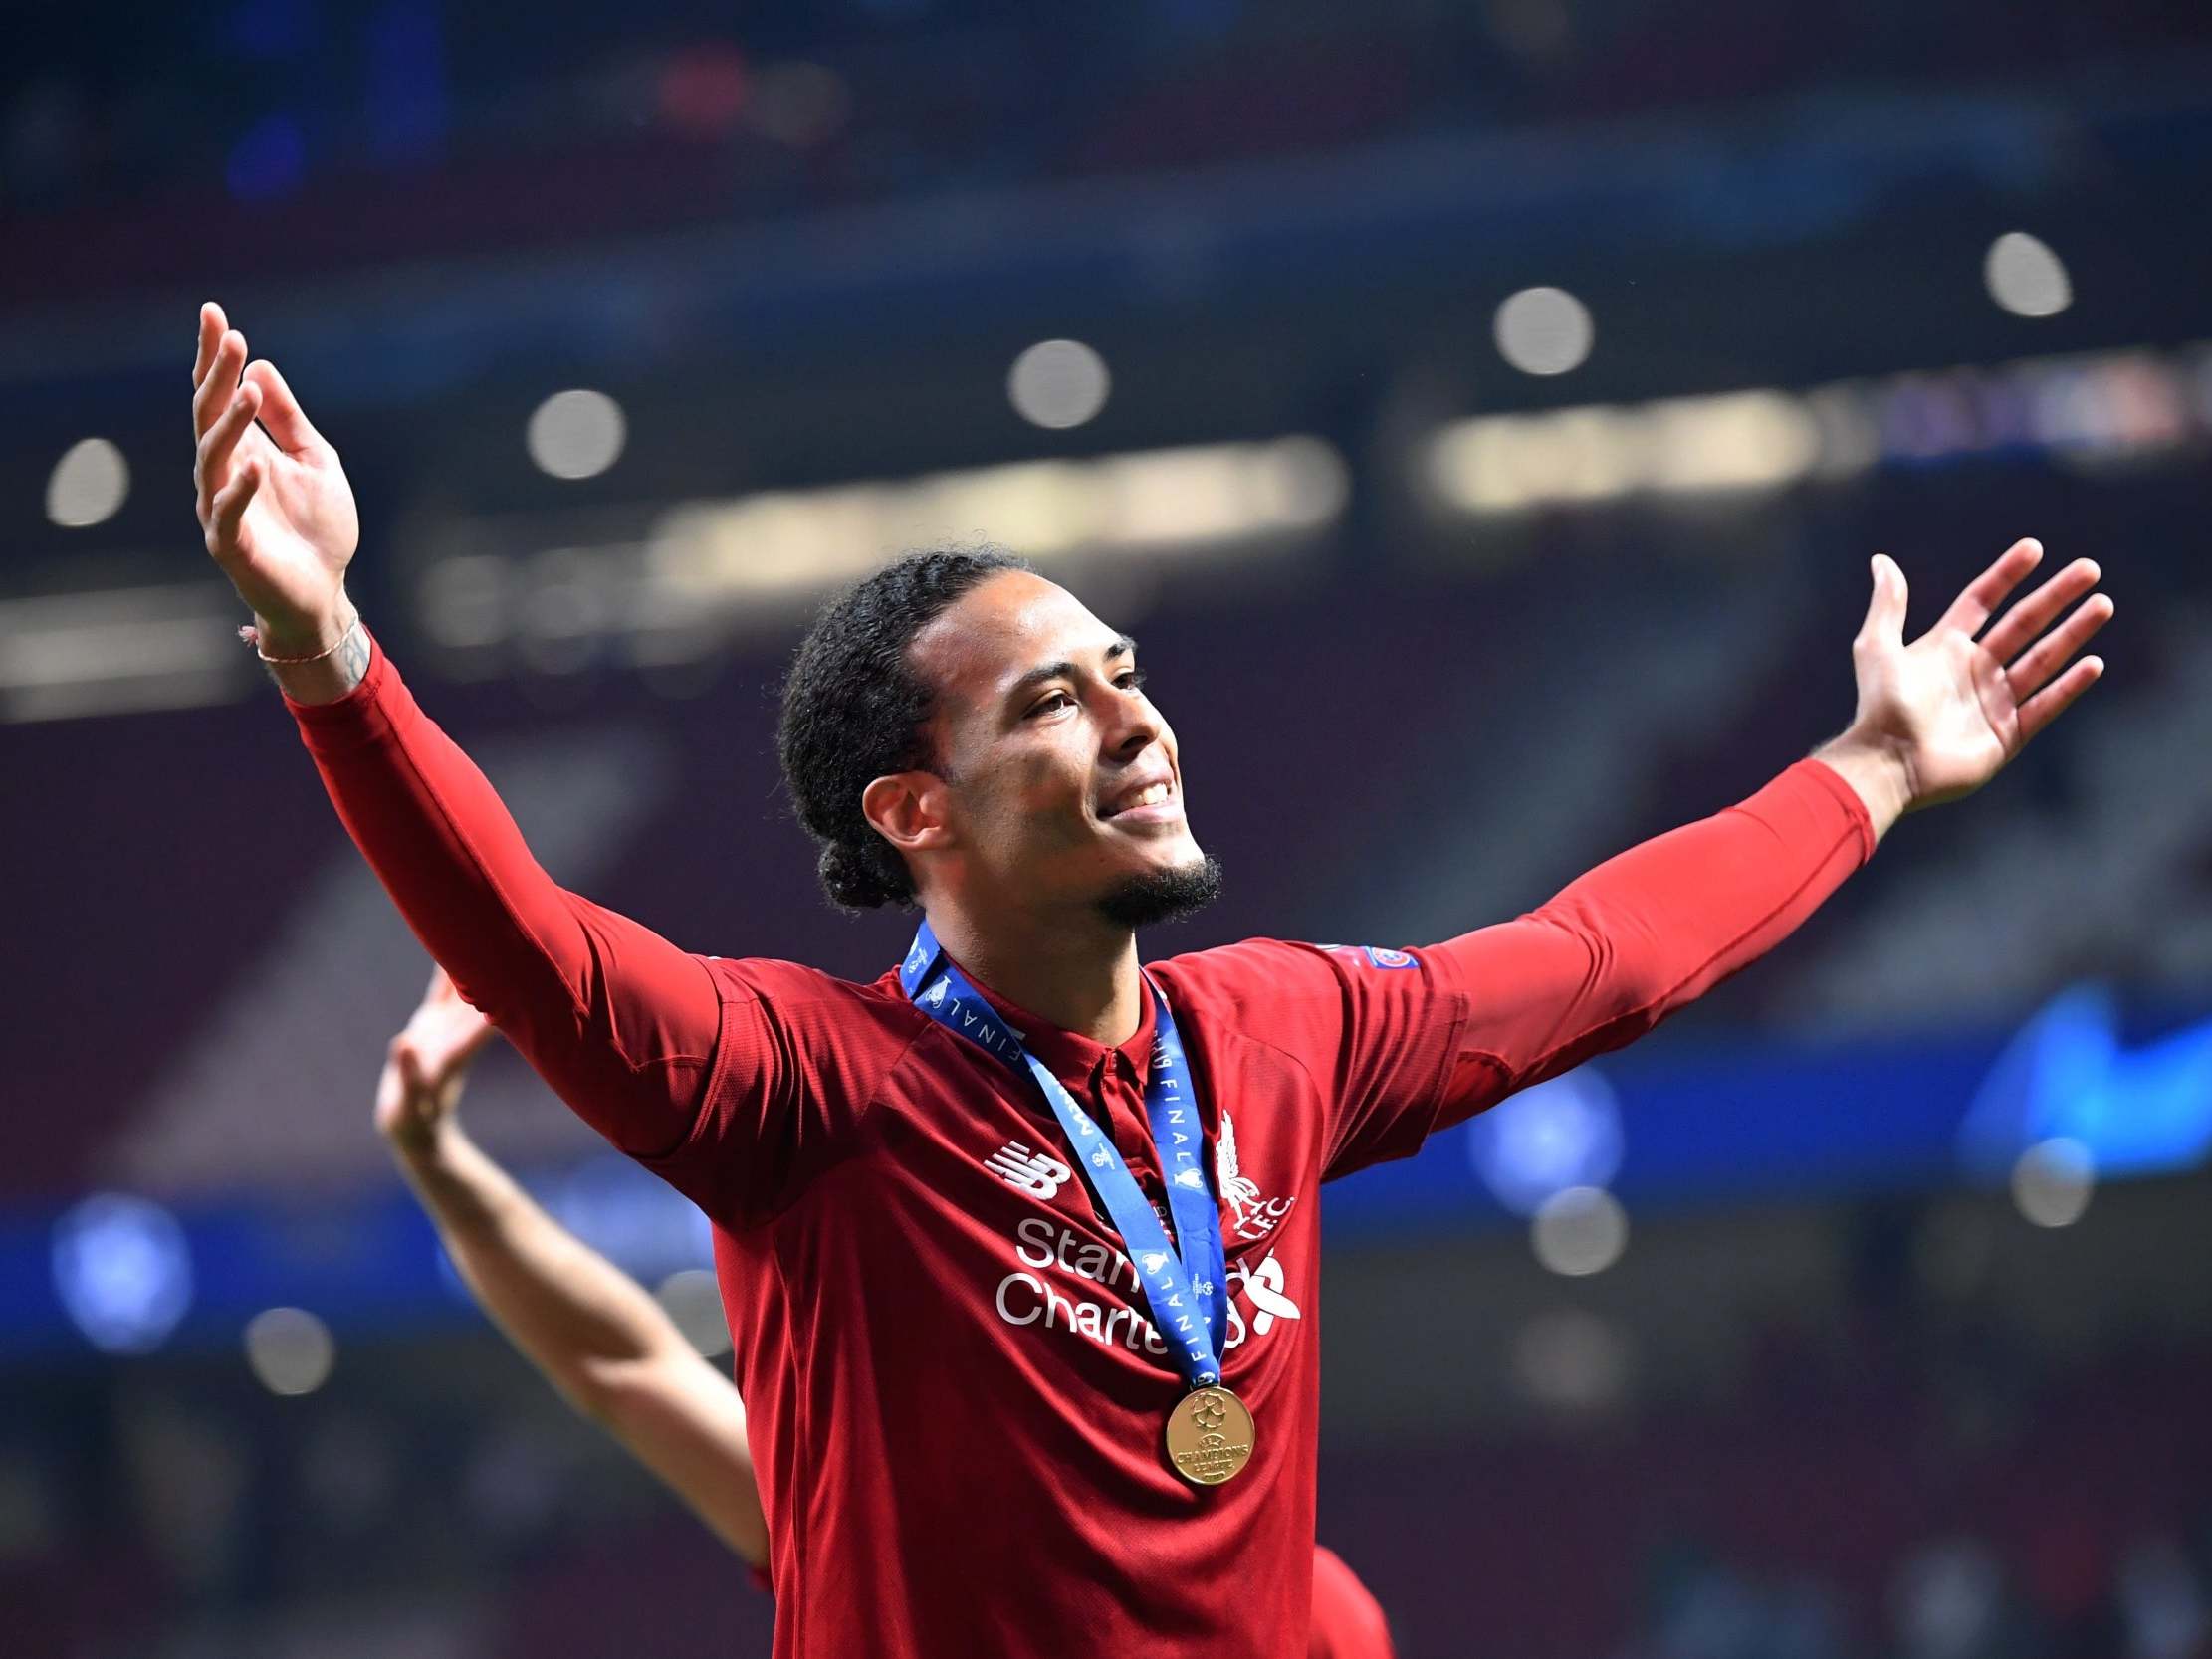 Virgil van Dijk was unfazed by the pressure of his world-record move